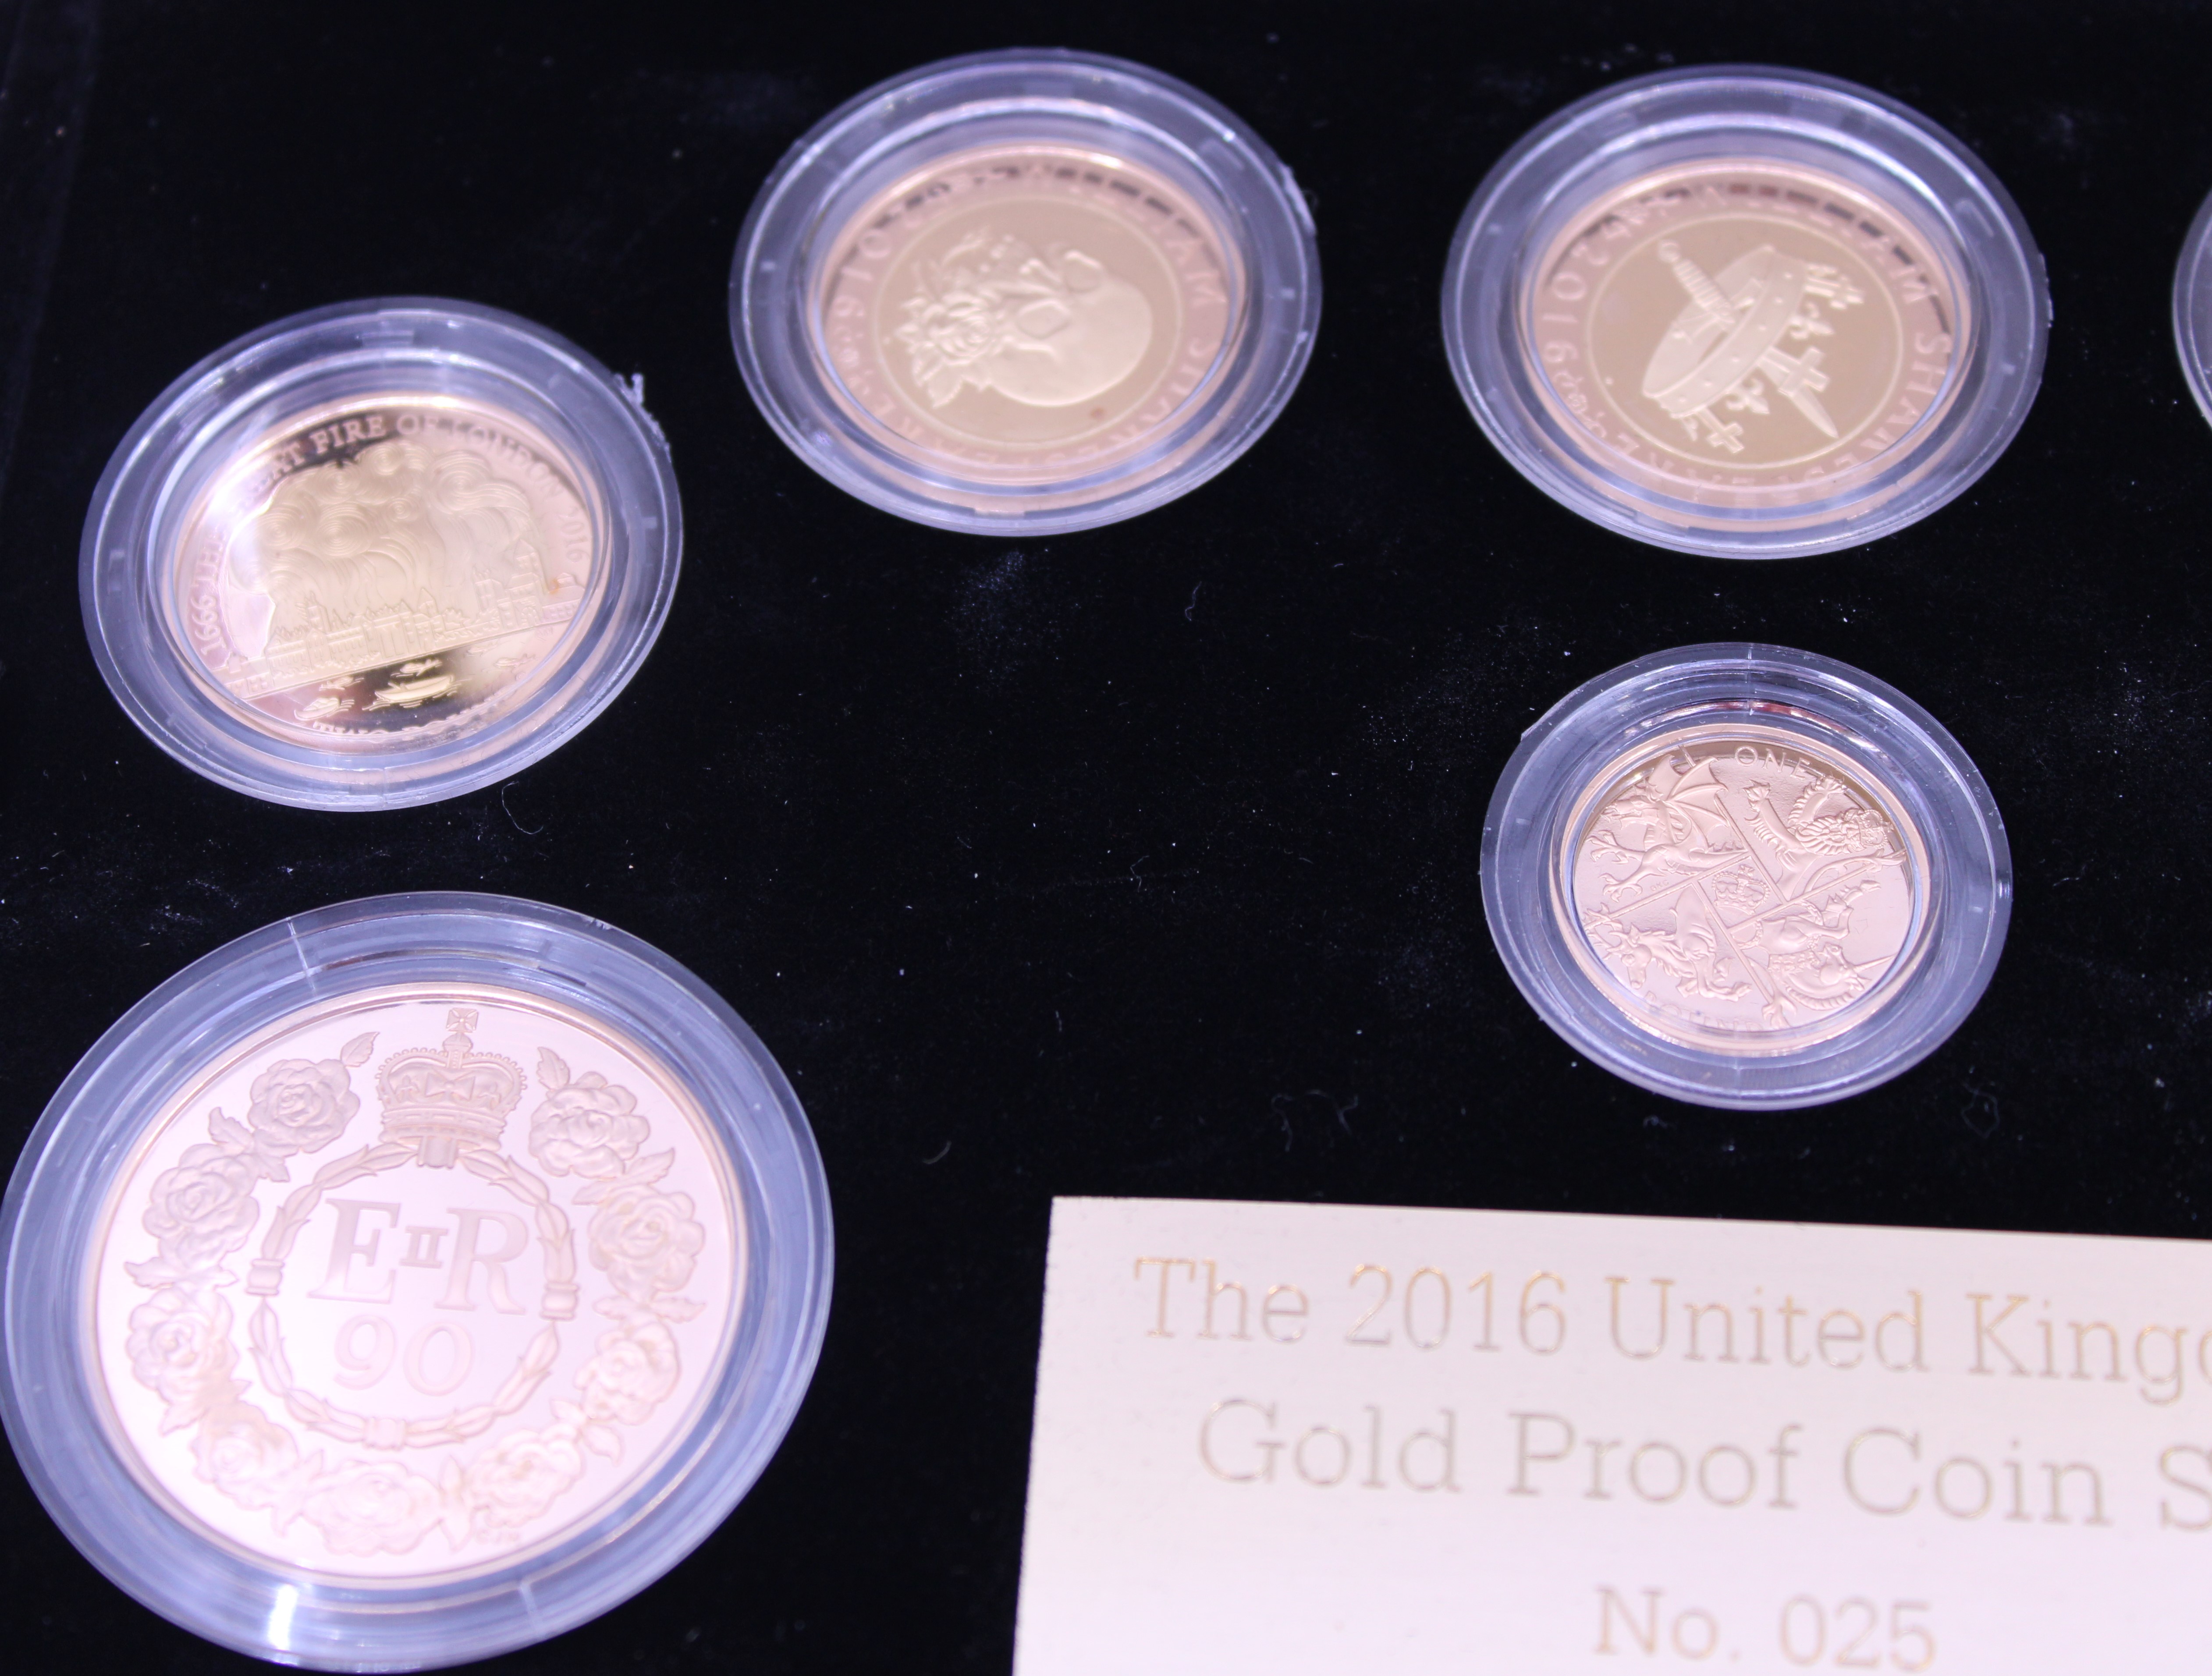 2016 UK Gold Proof Annual Set from The Royal Mint with eight commemorative coins in original box. - Image 3 of 5